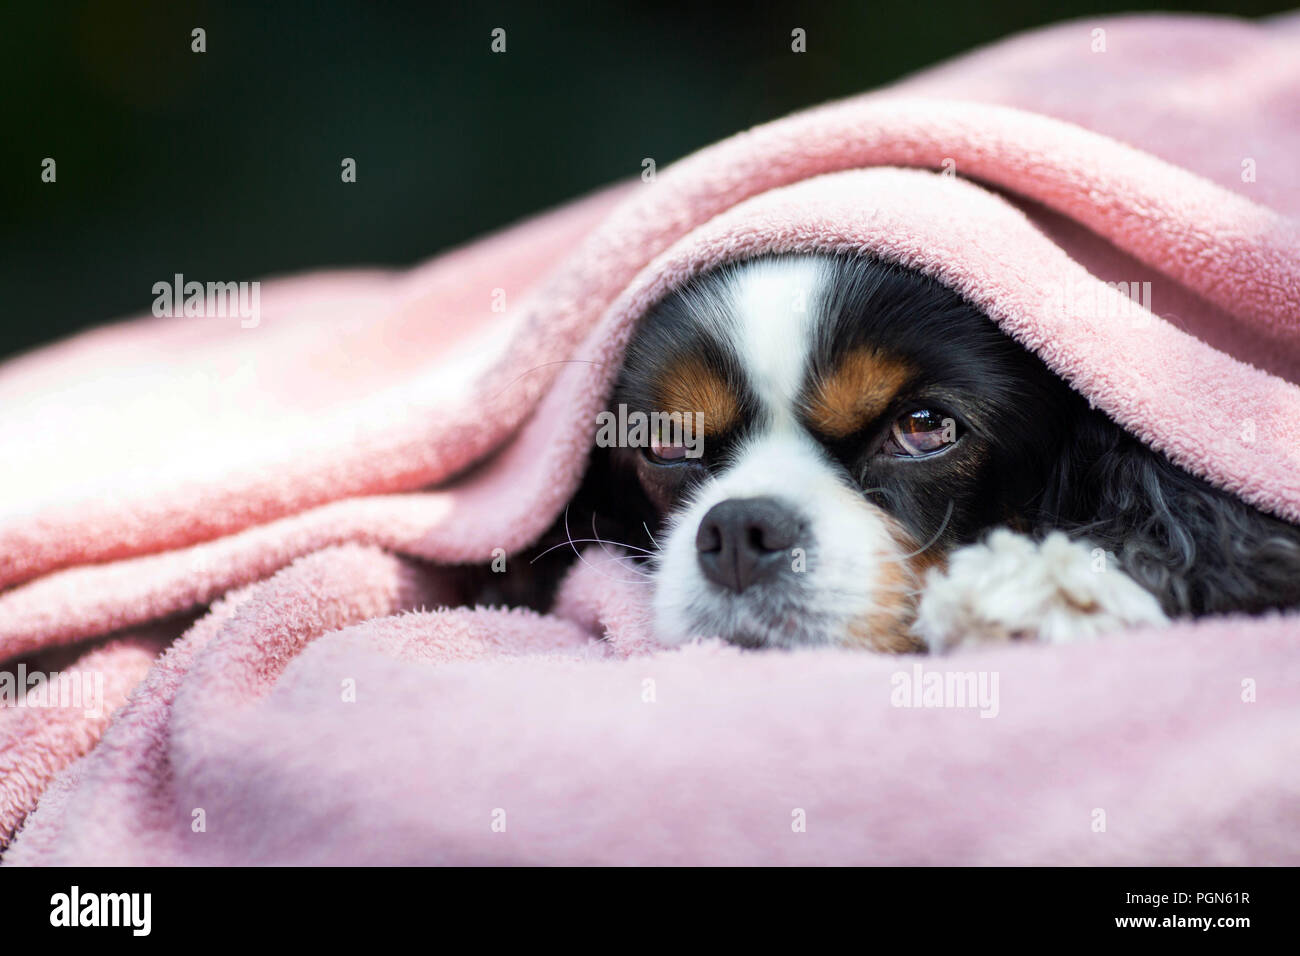 Cute dog relaxing under the warm blanket Stock Photo